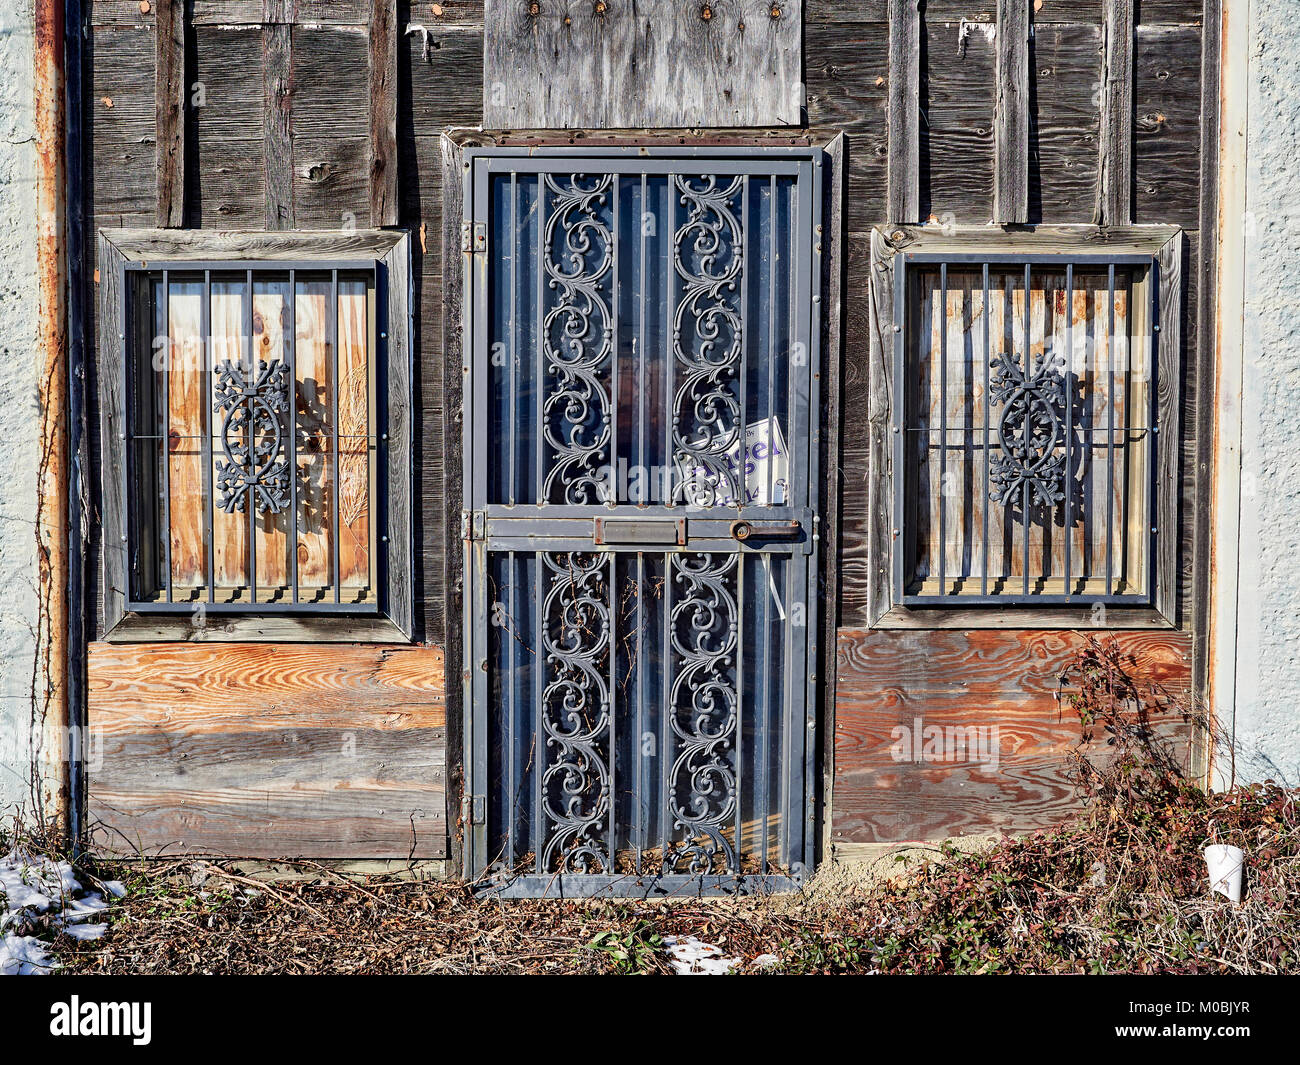 Exterior of dirty, weathered old abandoned wooden building with bars on the doors and windows in the industrial section of Montgomery Alabama, USA. Stock Photo